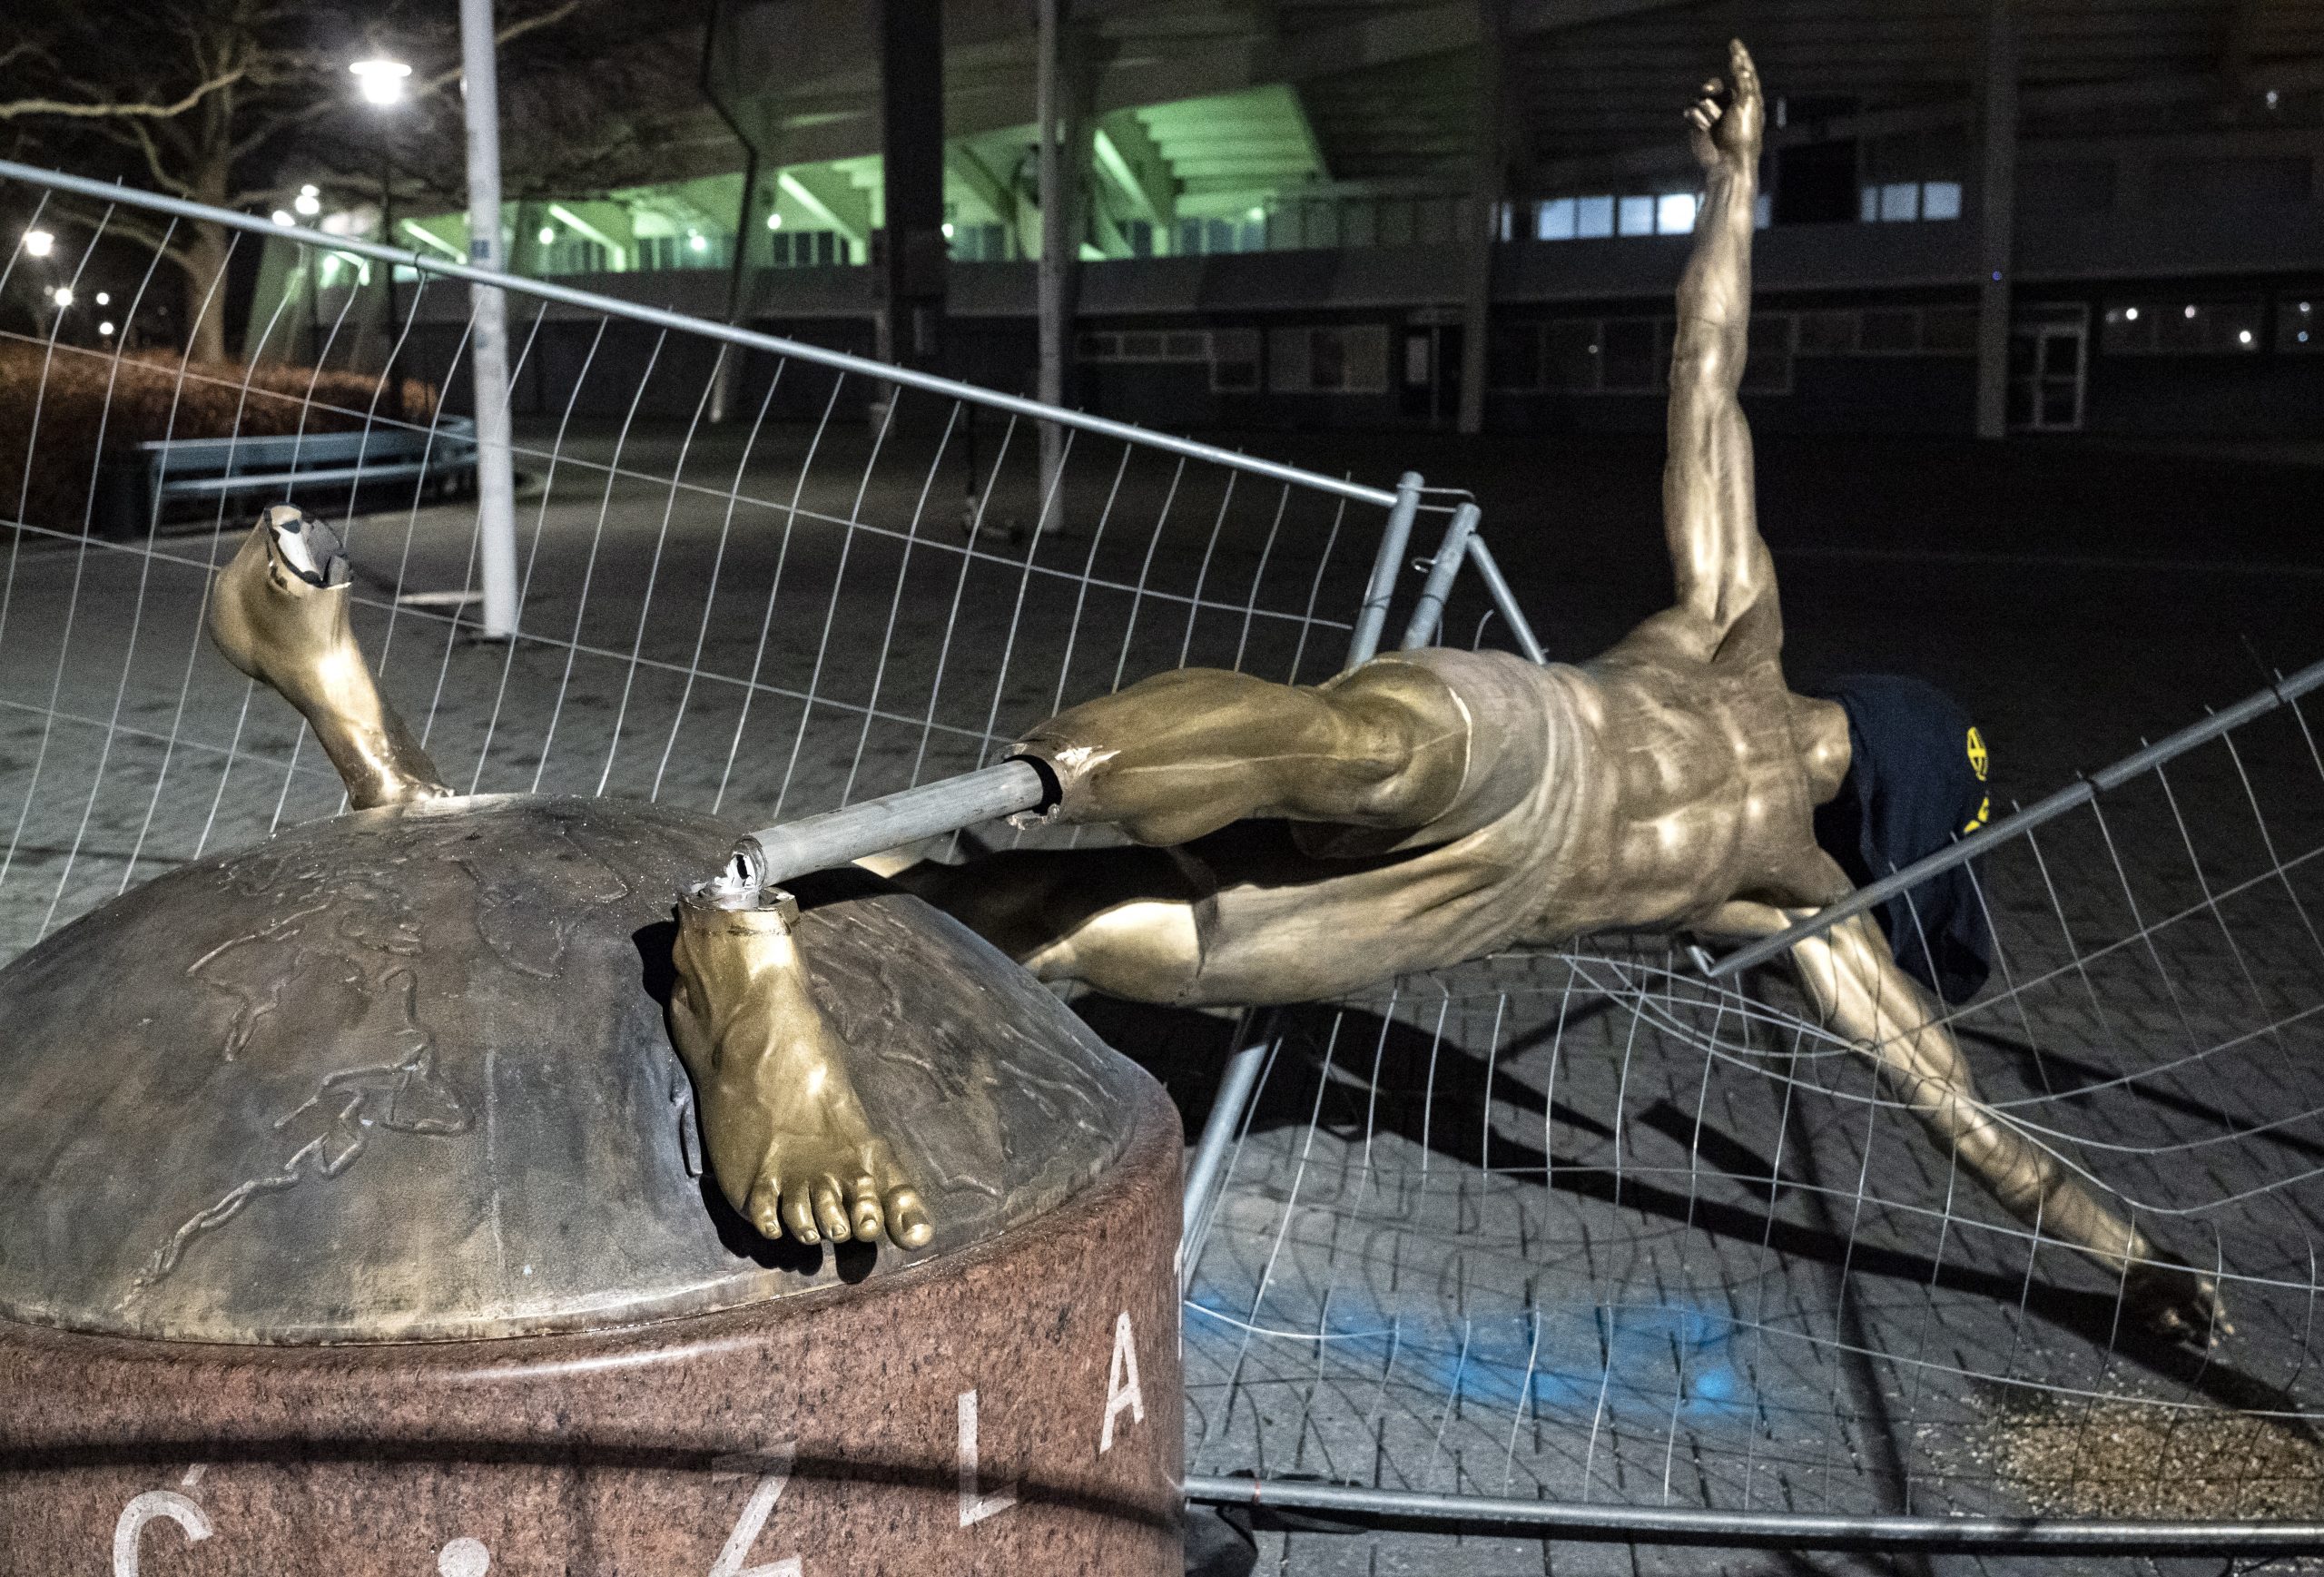 epa08104062 The staue of Swedish soccer player Zlatan Ibrahimovic has been completly sawn down and destroyed during the night, at the square next to Stadion football arena in Malmo, Sweden, 05 January 2020.  EPA/Johan Nilsson  SWEDEN OUT